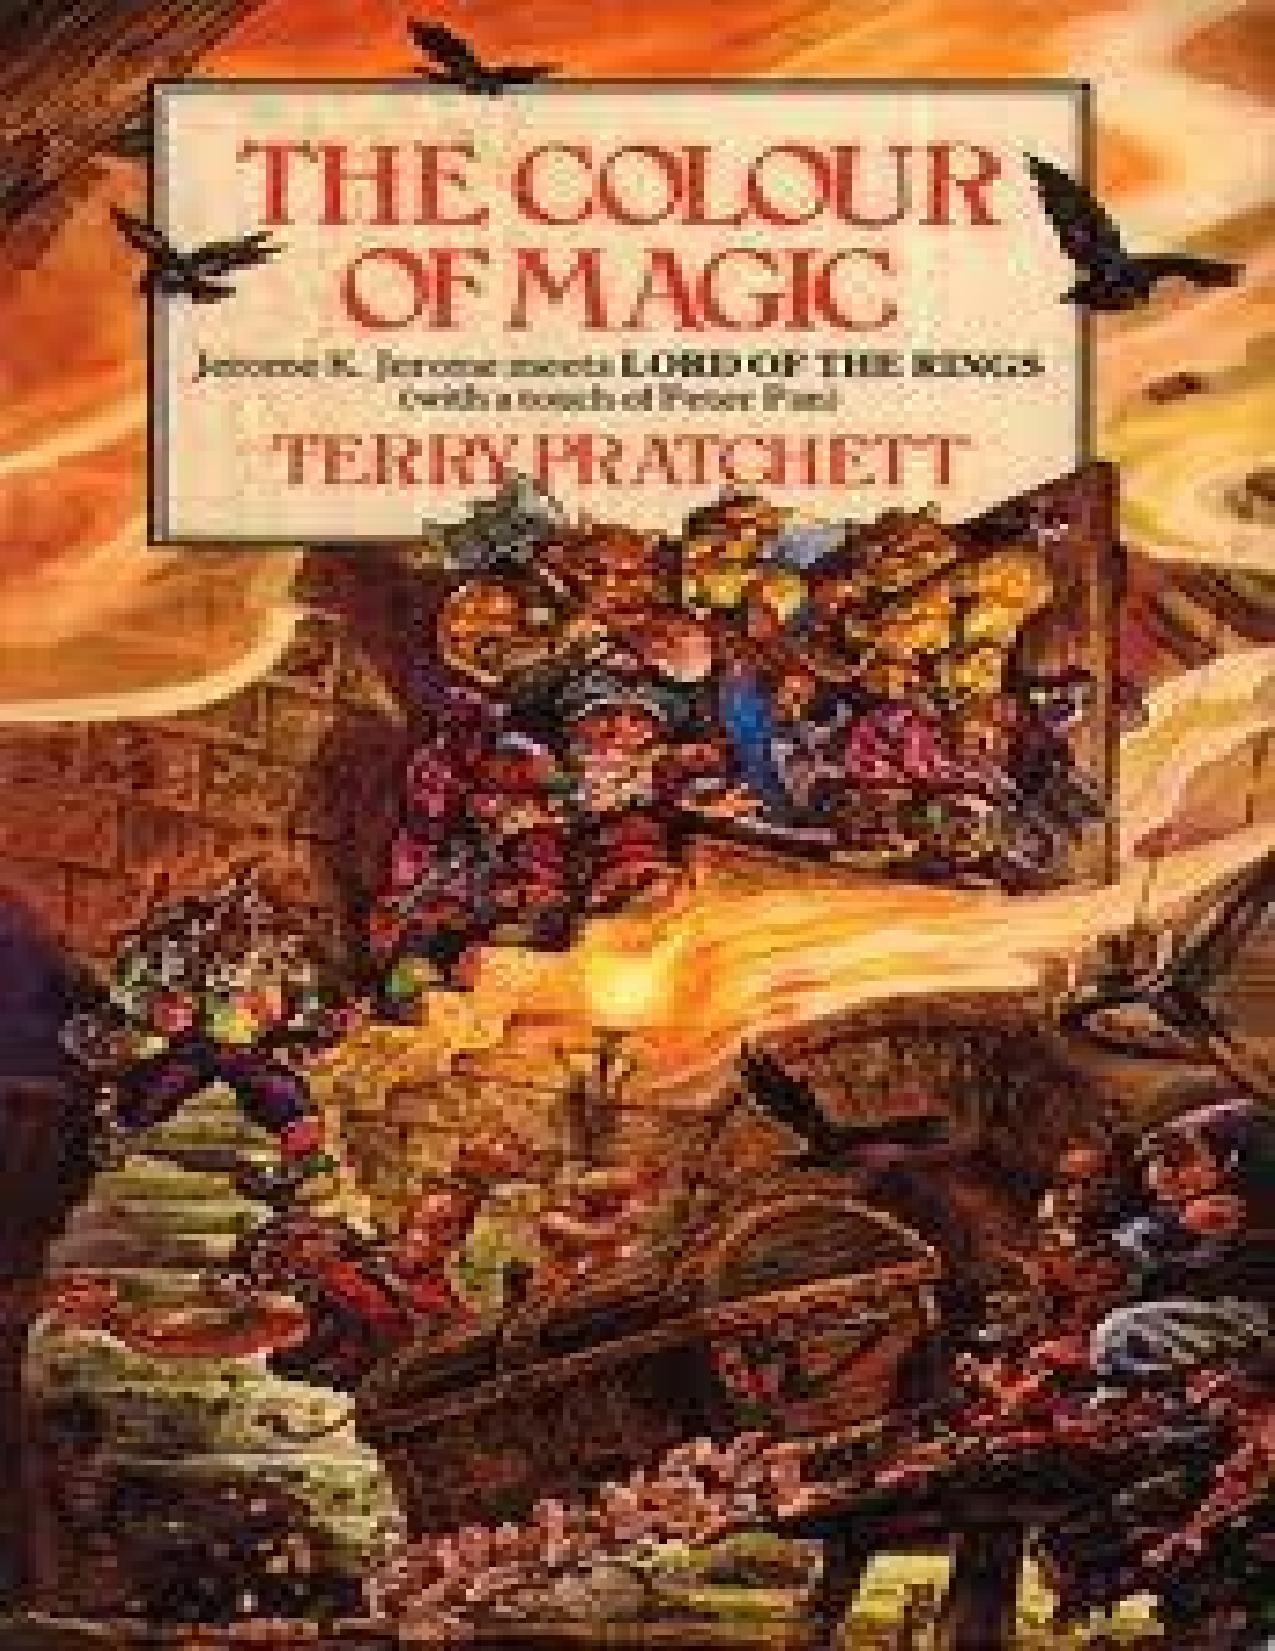 The Colour of Magic by Terry Pratchett